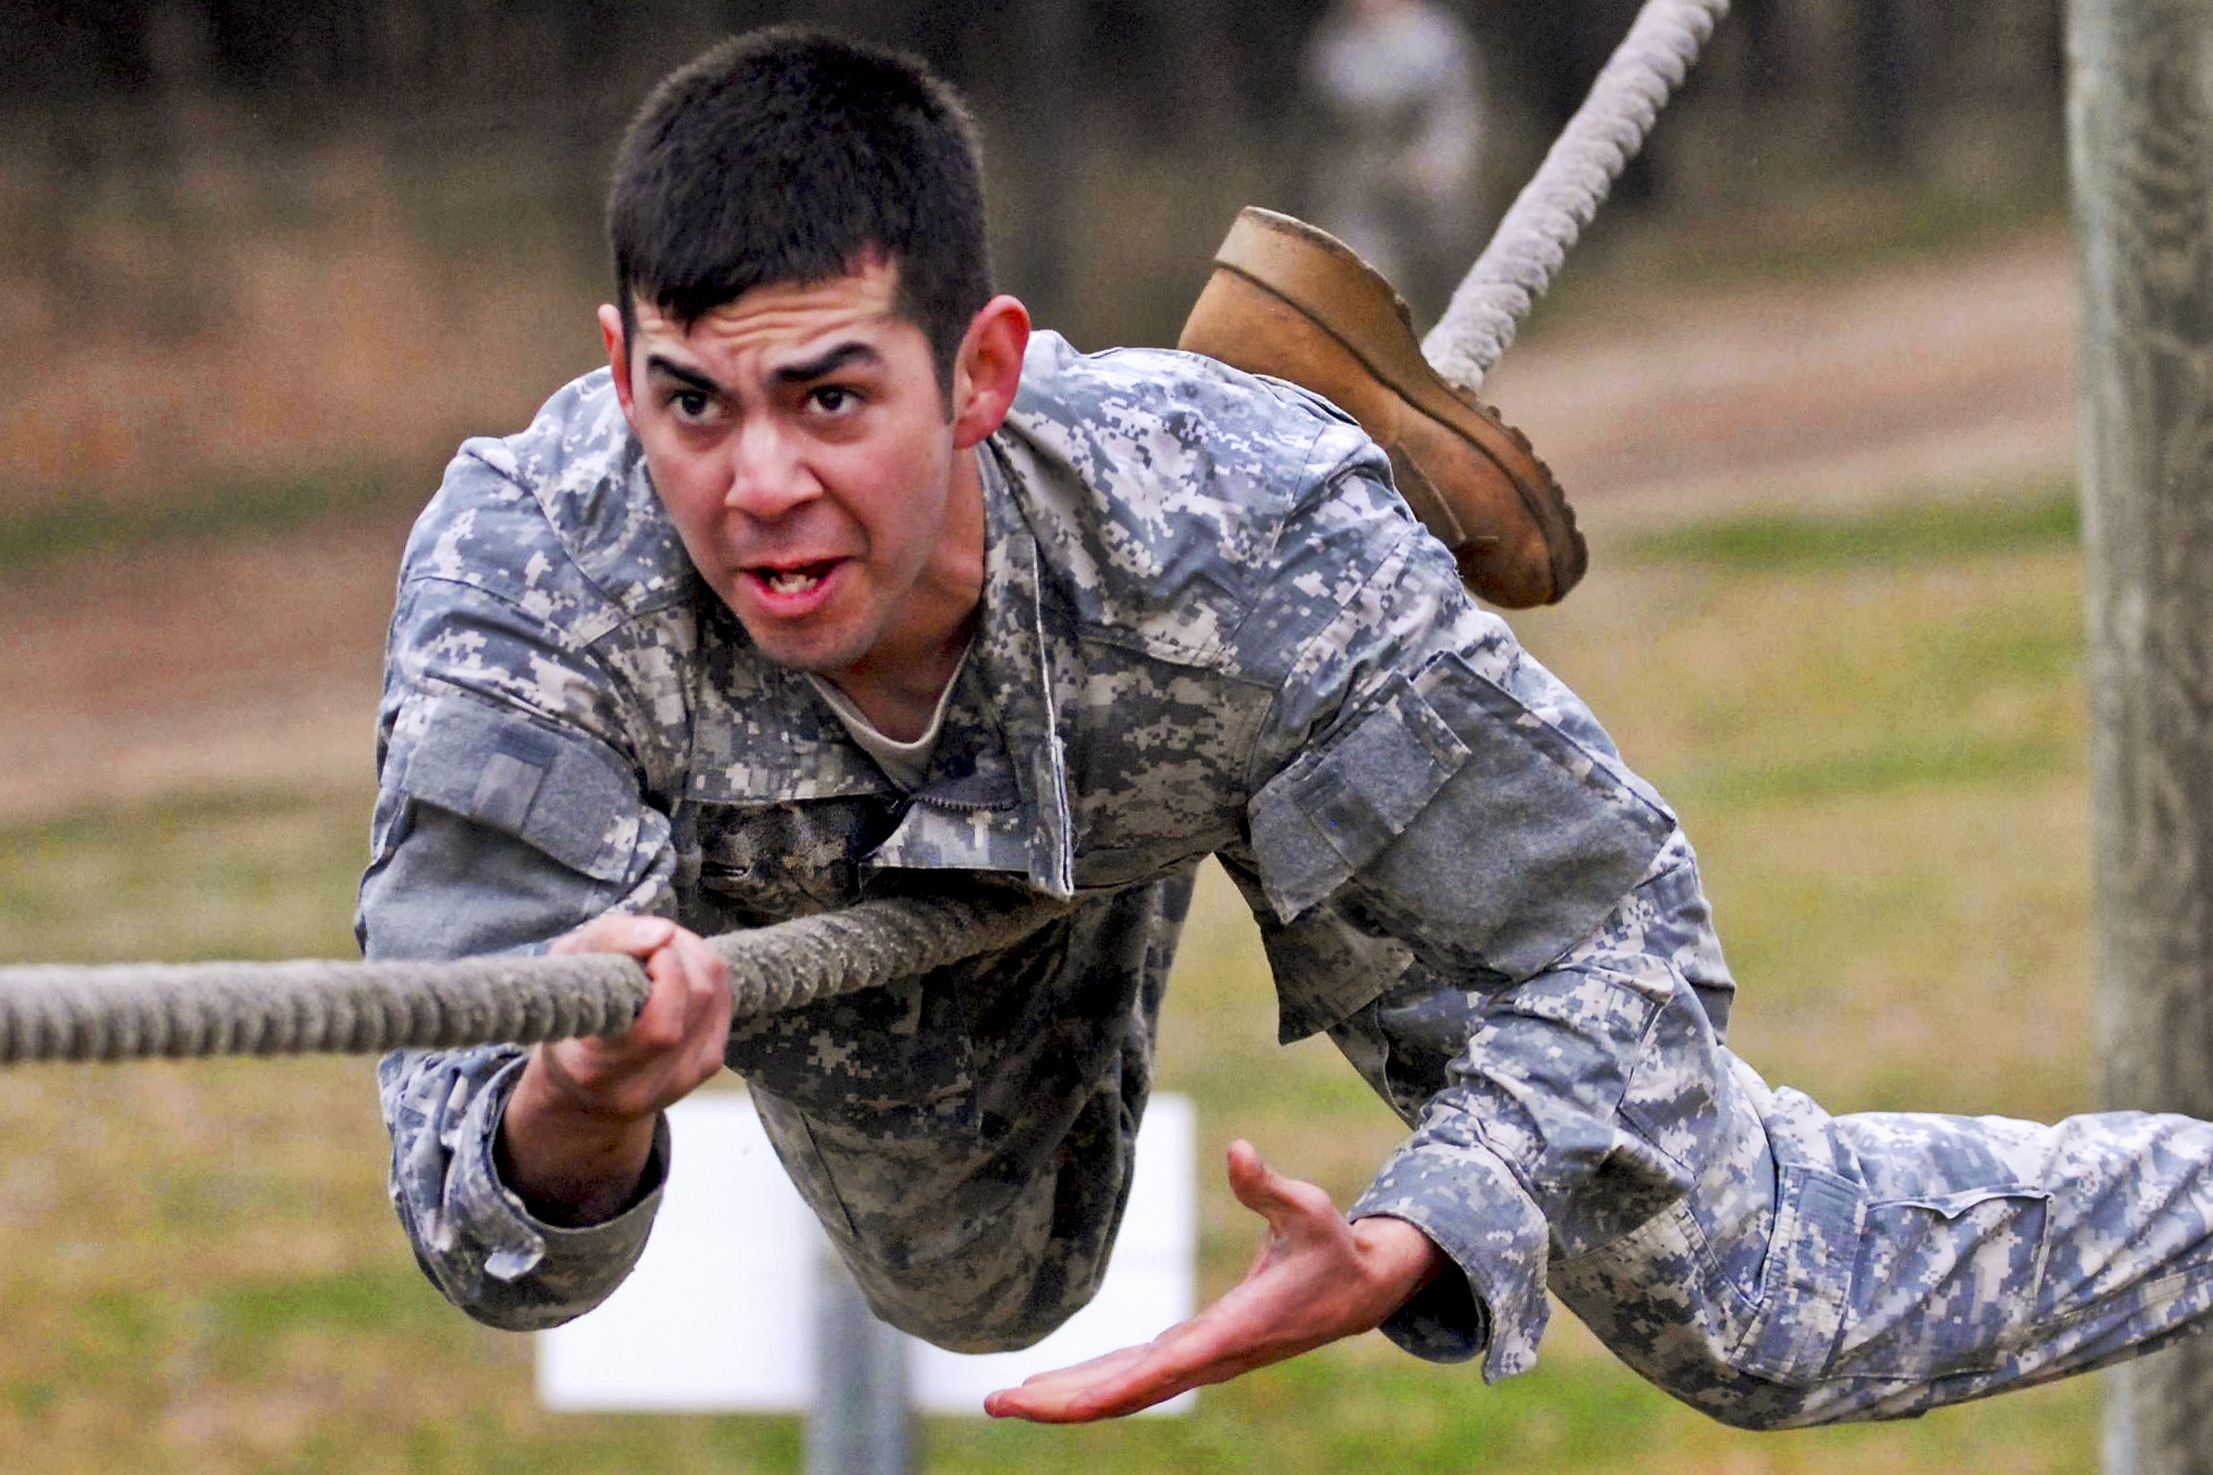 File:Defense.gov News Photo 110505-O-9999C-747 - U.S. Army Sgt. Daniel  Florez climbs across a rope bridge at the confidence course event during  the Regional Army Reserve Best Warrior Competition.jpg - Wikimedia Commons